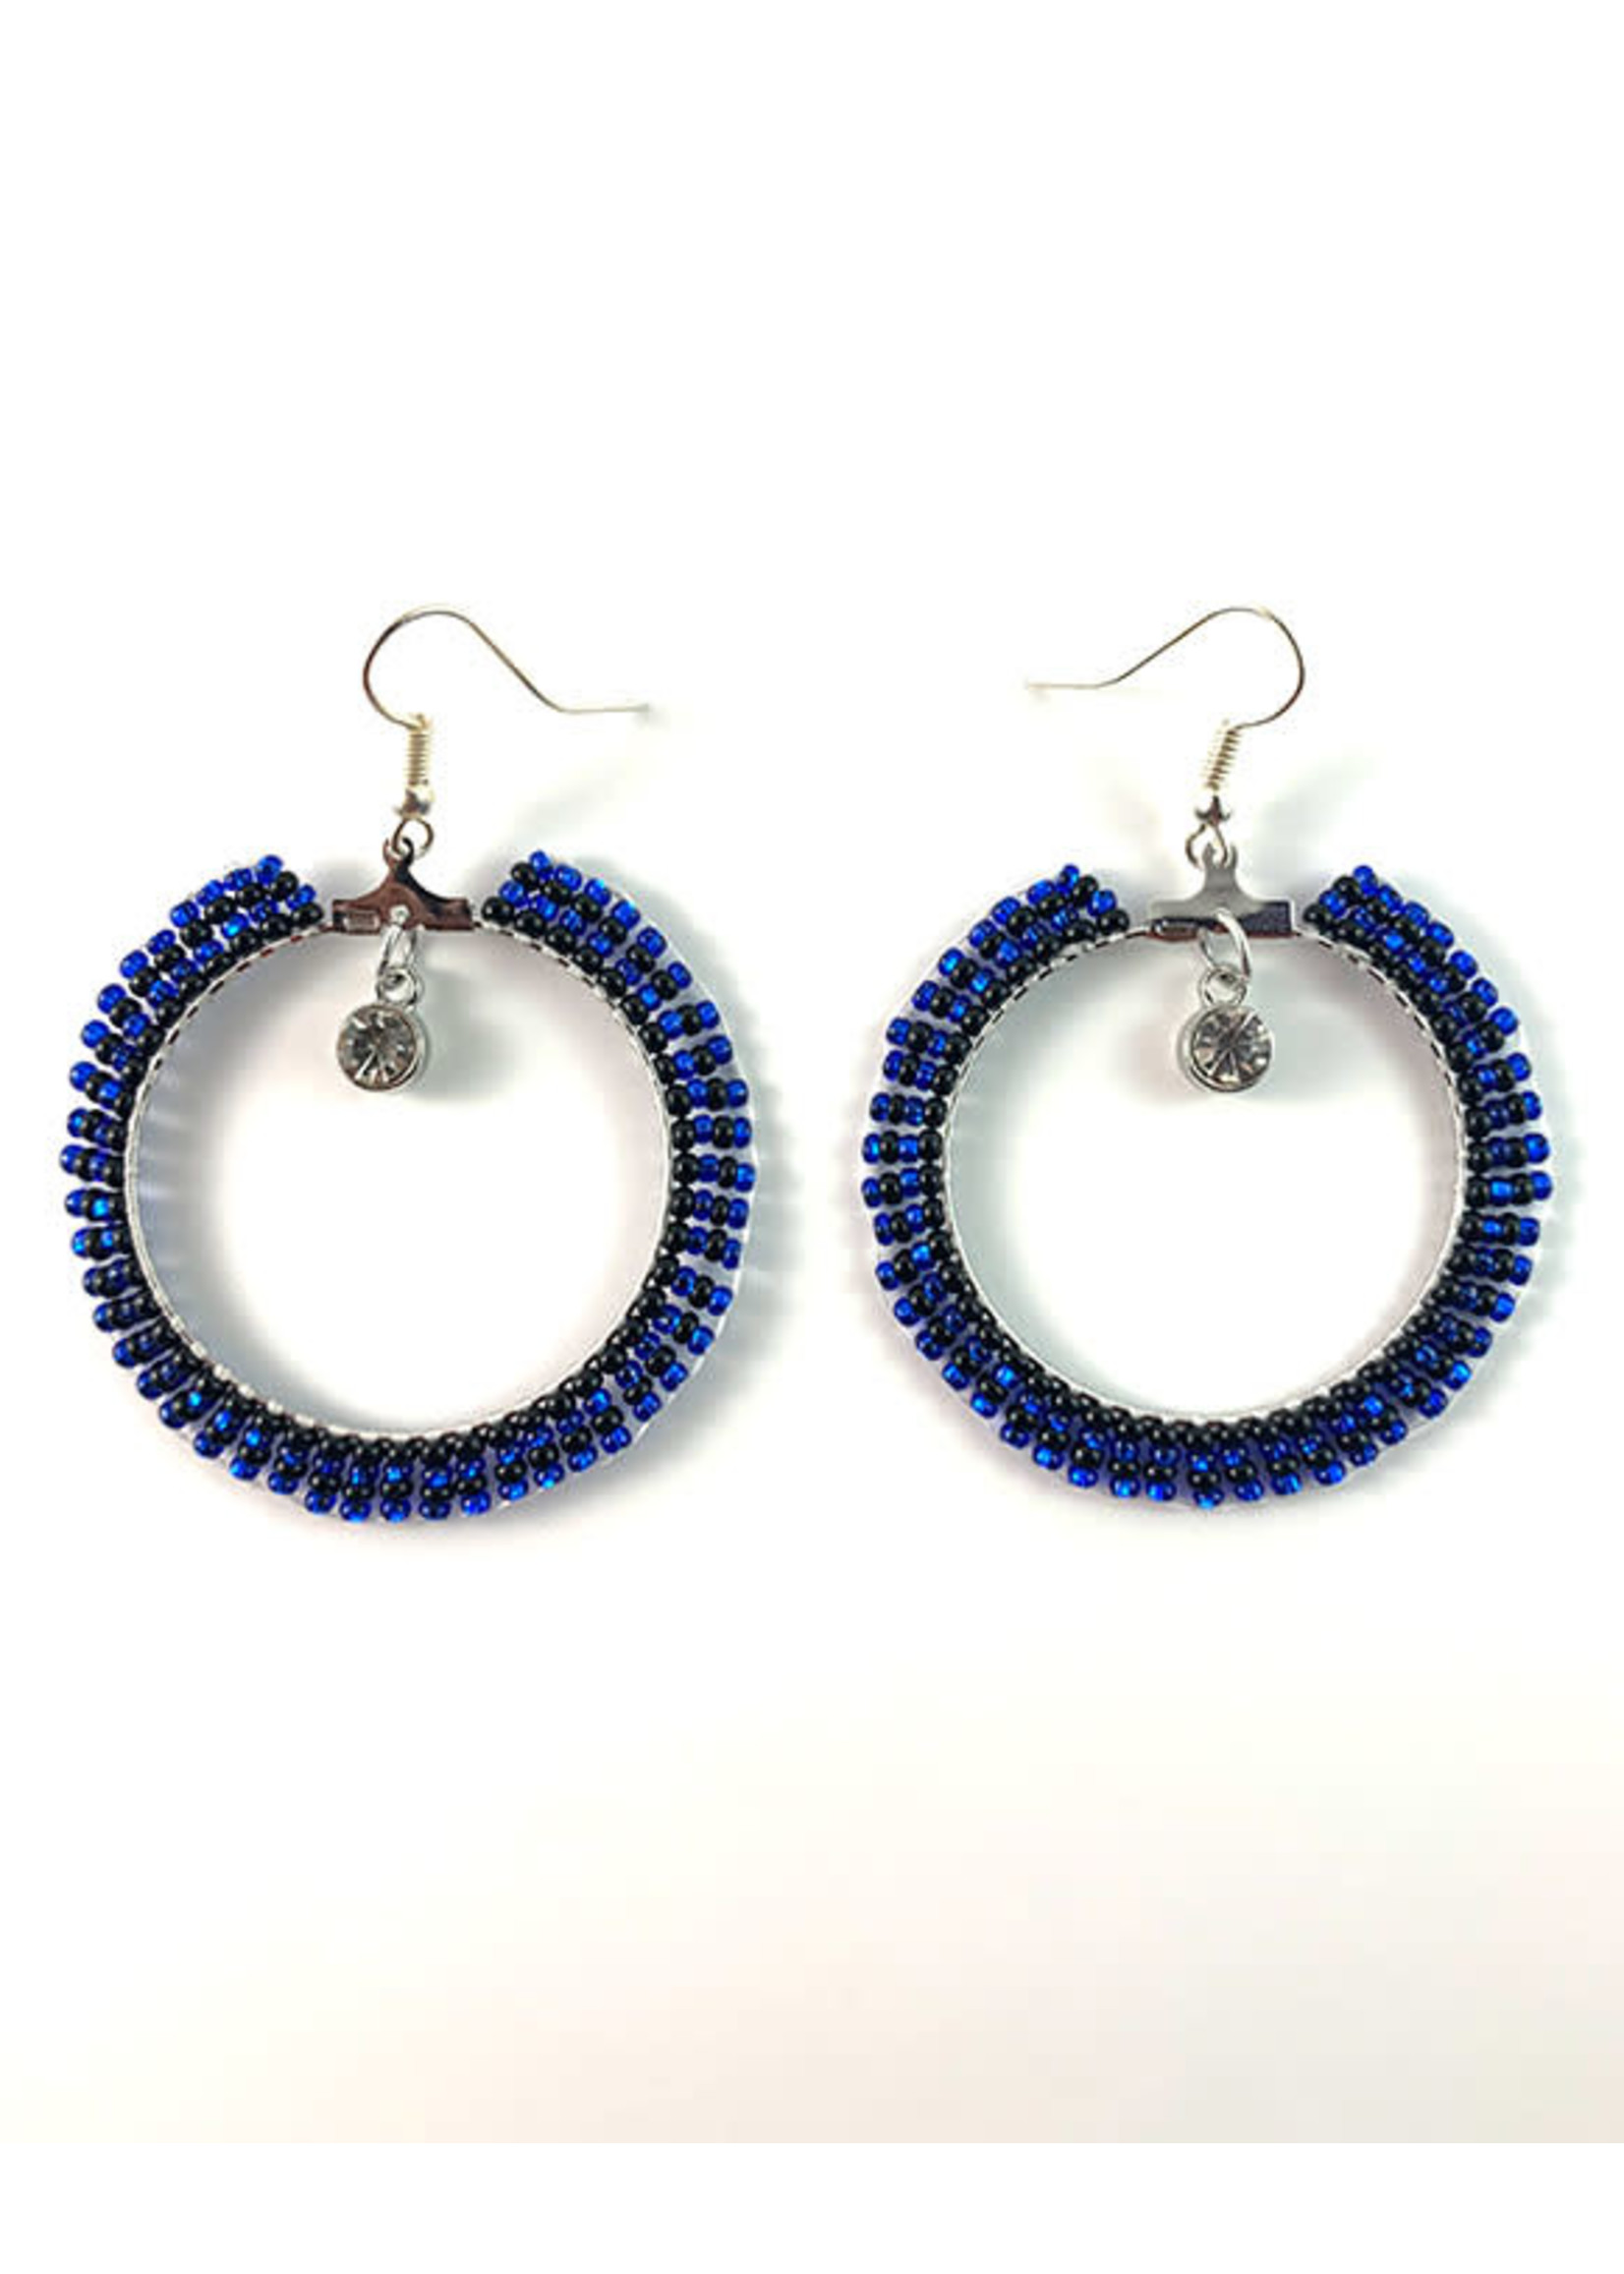 Beaded Earrings Hoops Silver Lined Blue and Opaque Black with Jewel (SOLD)